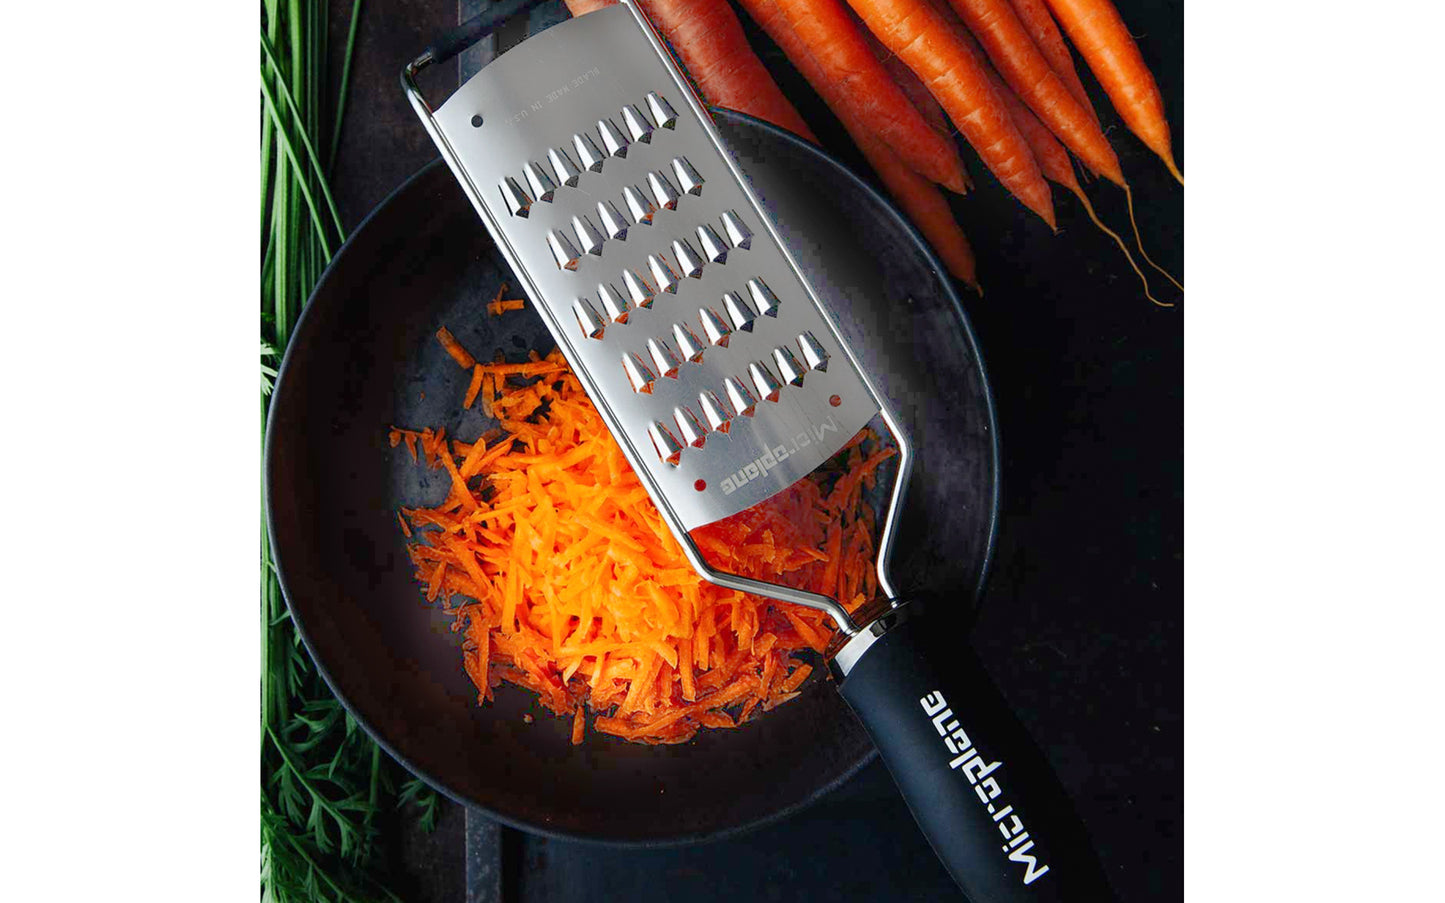 Made in USA - Blade made in USA - For cutting zucchini, carrots, cucumber, radishes, beets, & other vegetables into thin matchsticks - Non-slip grip - Dishwasher safe - Sharp blade made from stainless steel - 18/8 grade - Ergonomic handle ~ No-slip base - Microplane Gourmet Series - Gourmet Julienne Grater - 45003